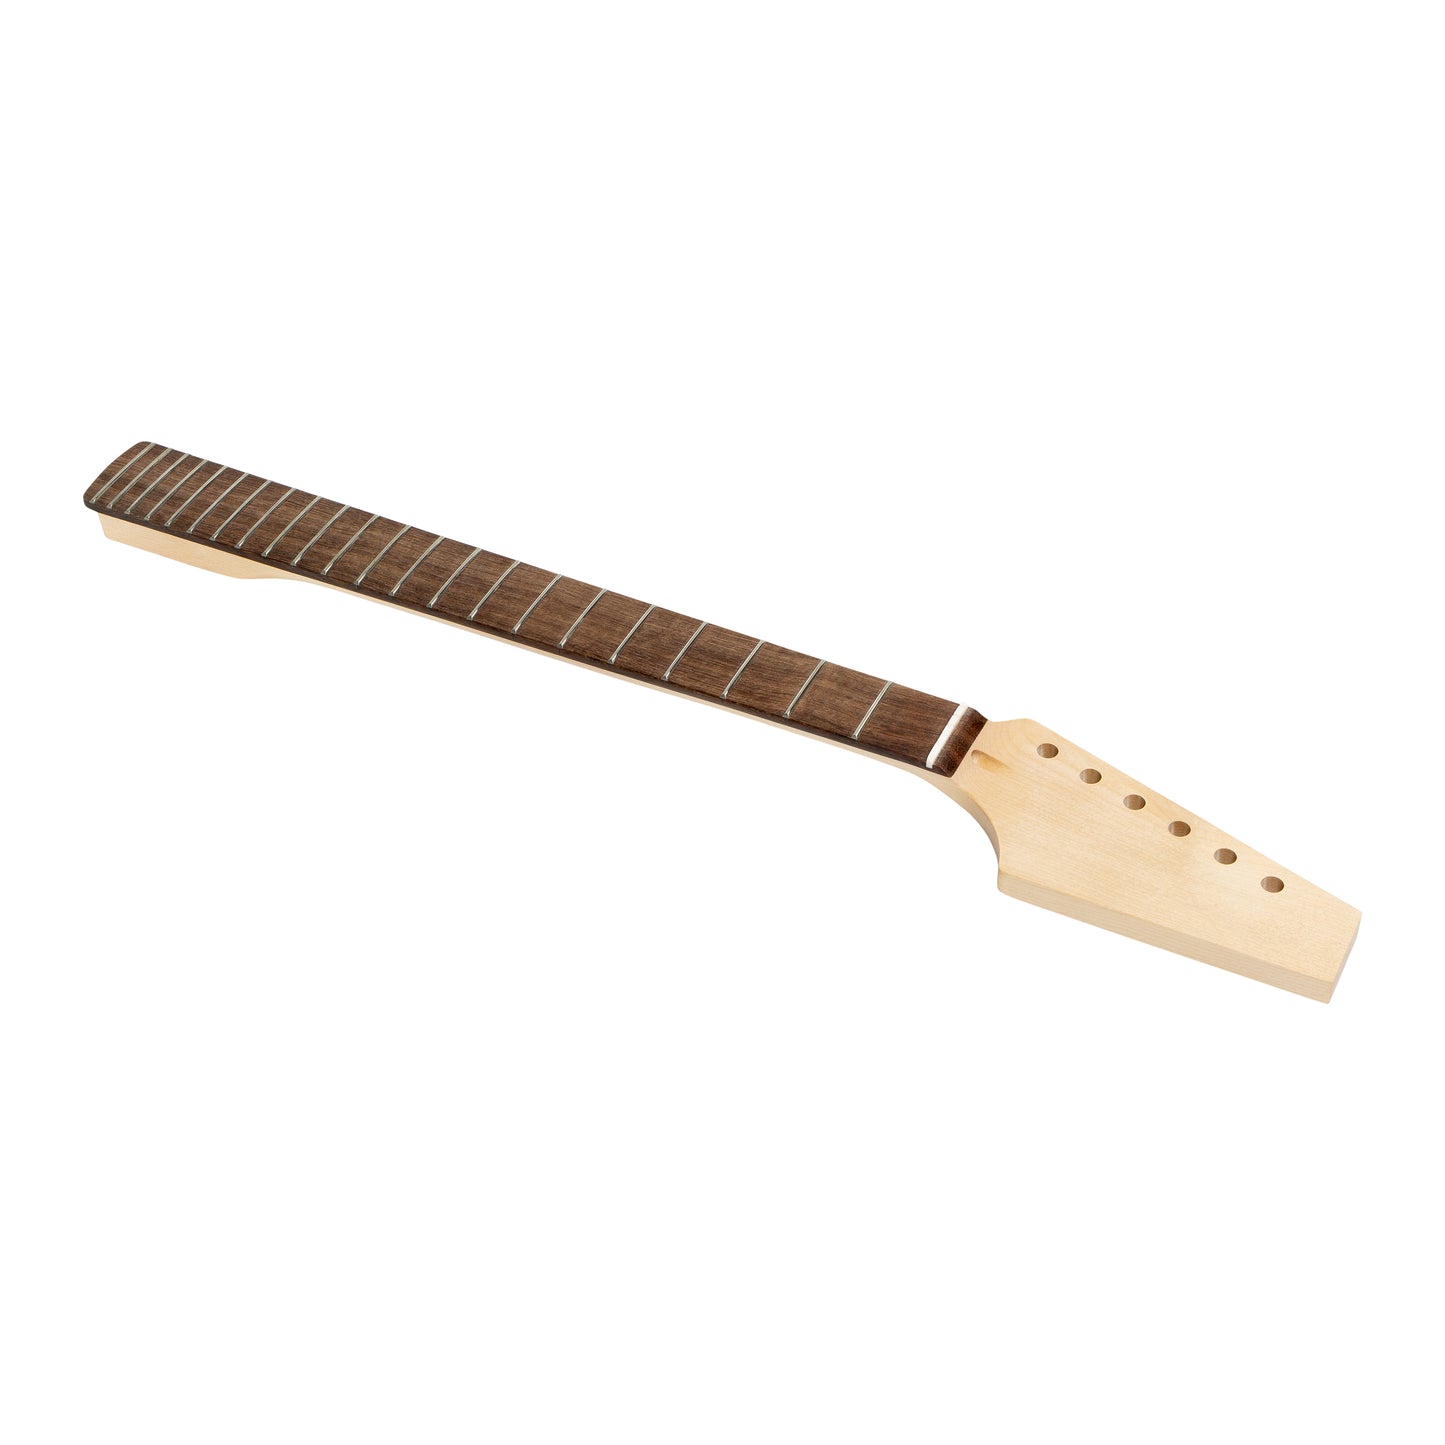 AE Guitars® S-Style Guitar Neck 22 Frets Rosewood No Inlay